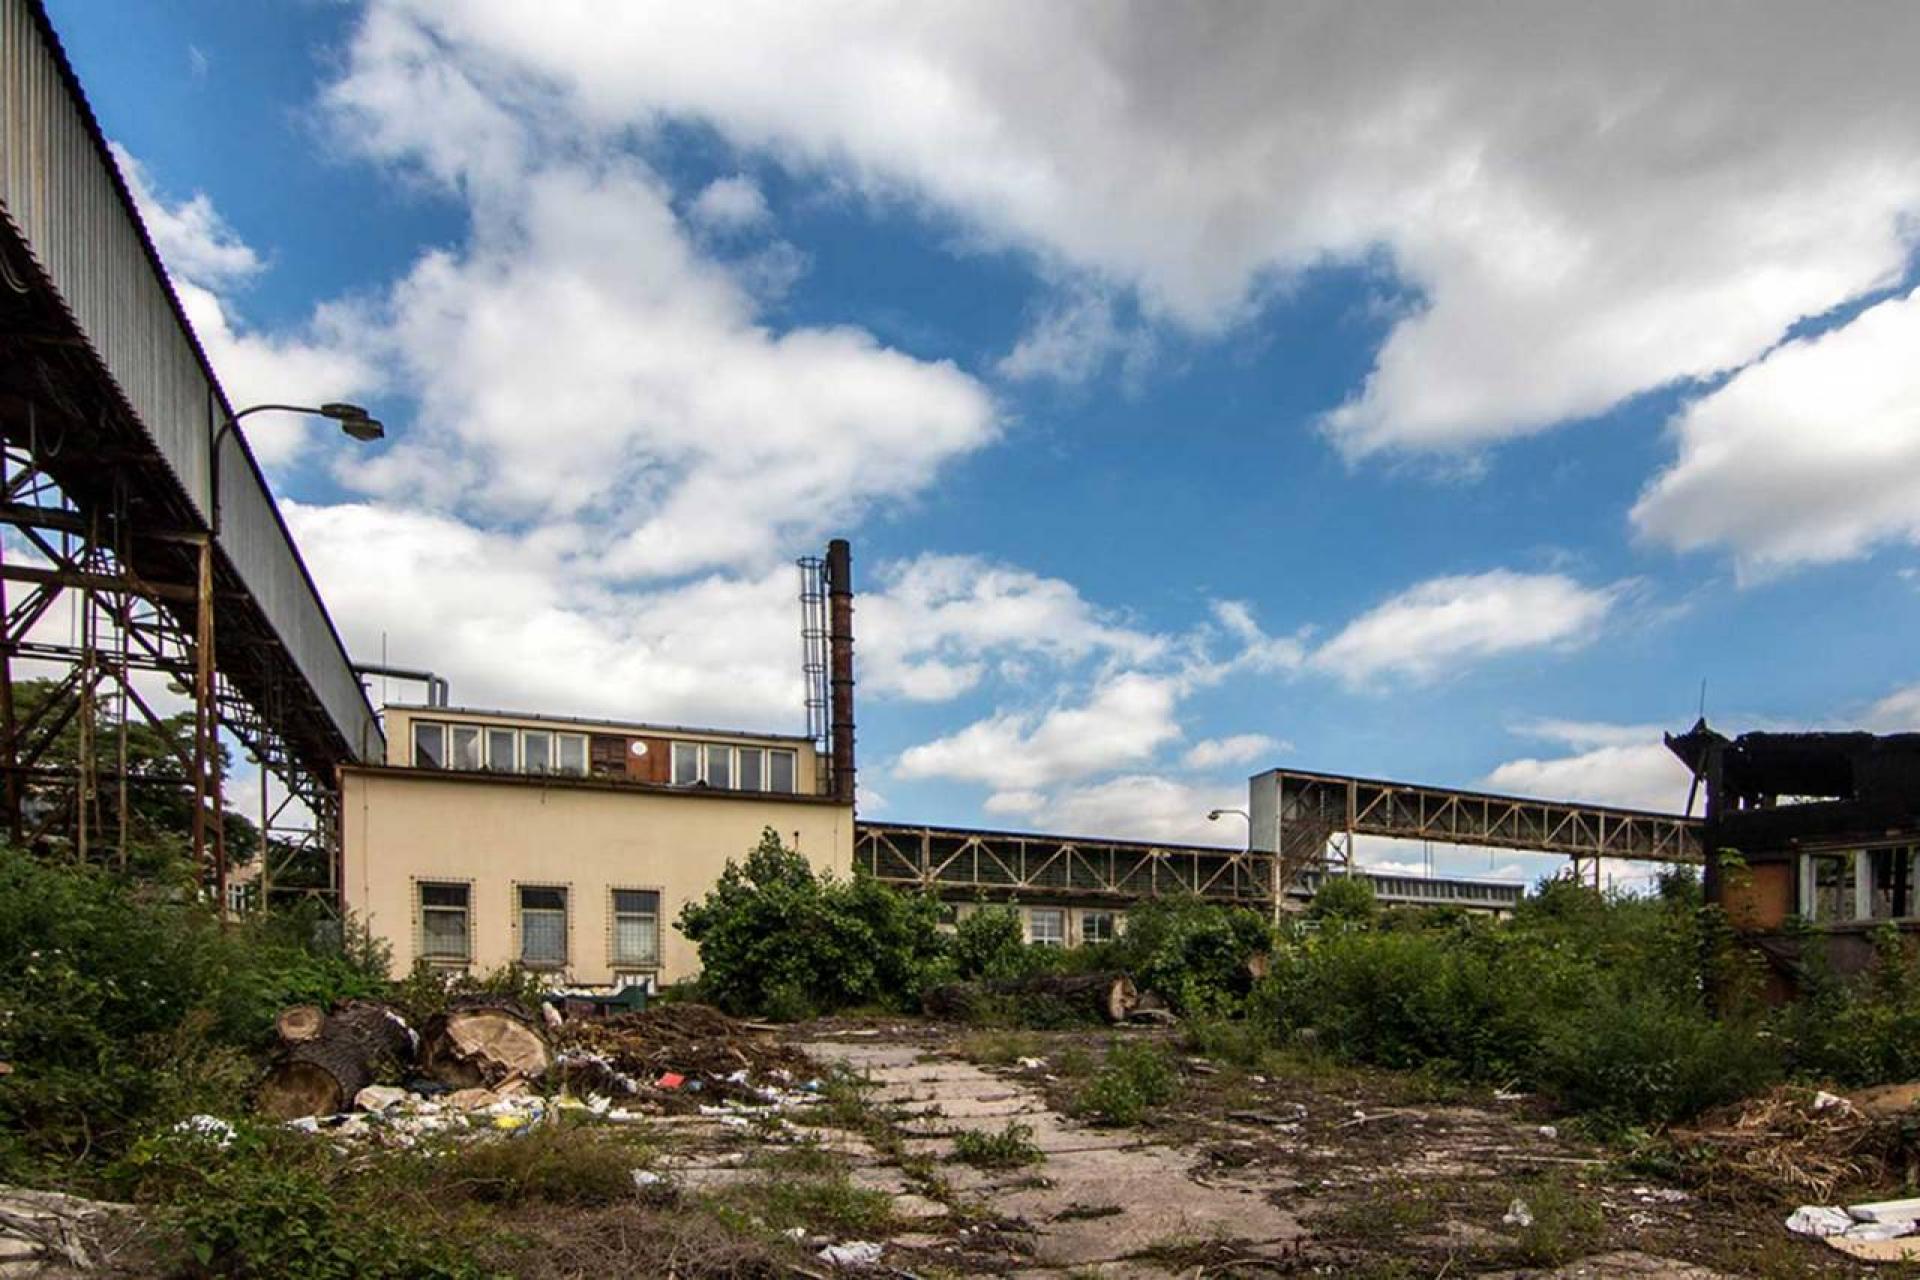 Some outer buildings still remain, linked by covered walkways. Other buildings have been bulldozed. | Photo Katka Havlíková